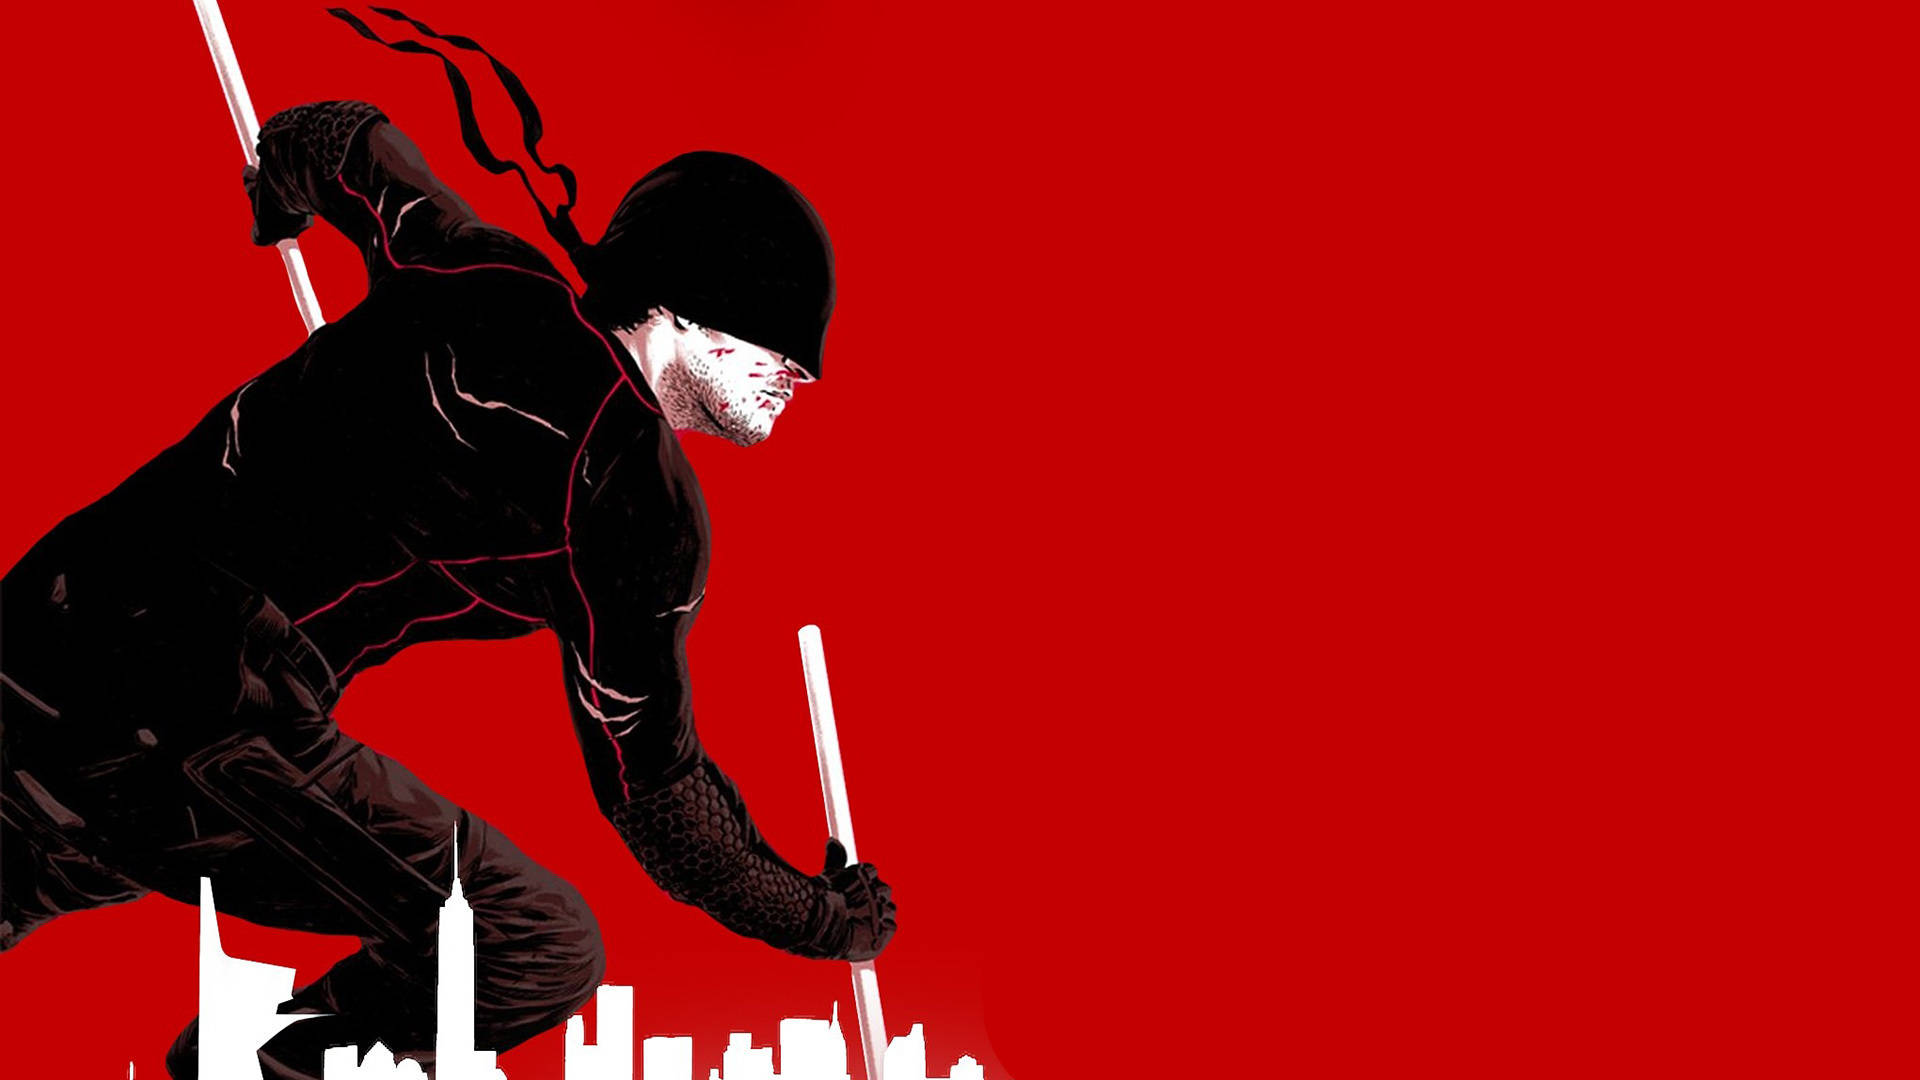 Charging Daredevil Abstract Background